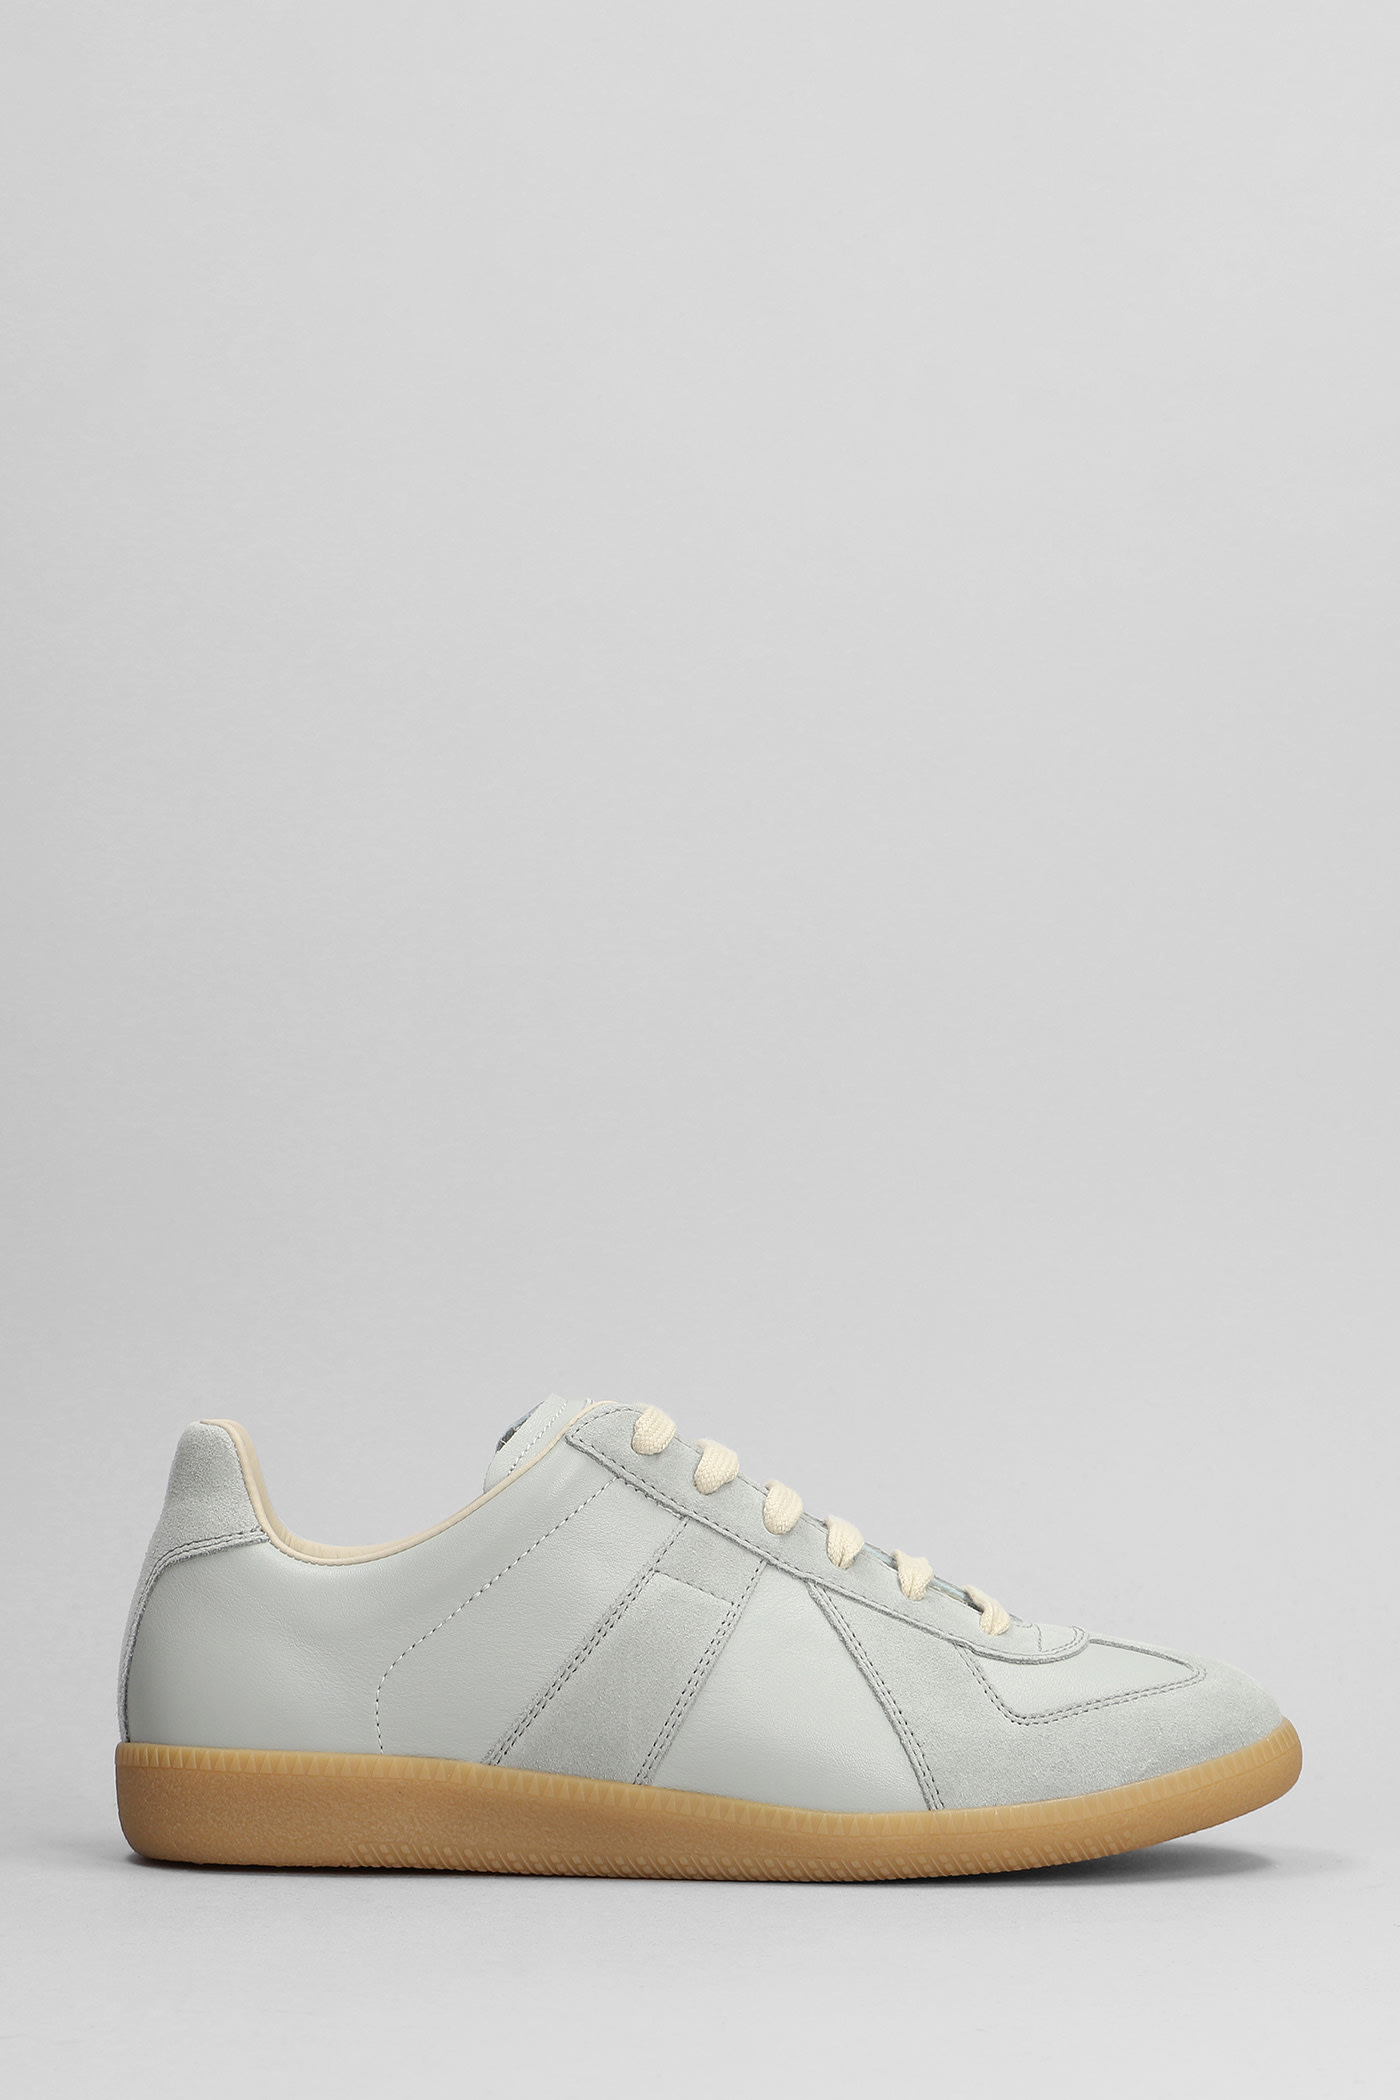 Maison Margiela Replica Trainers In Grey Leather